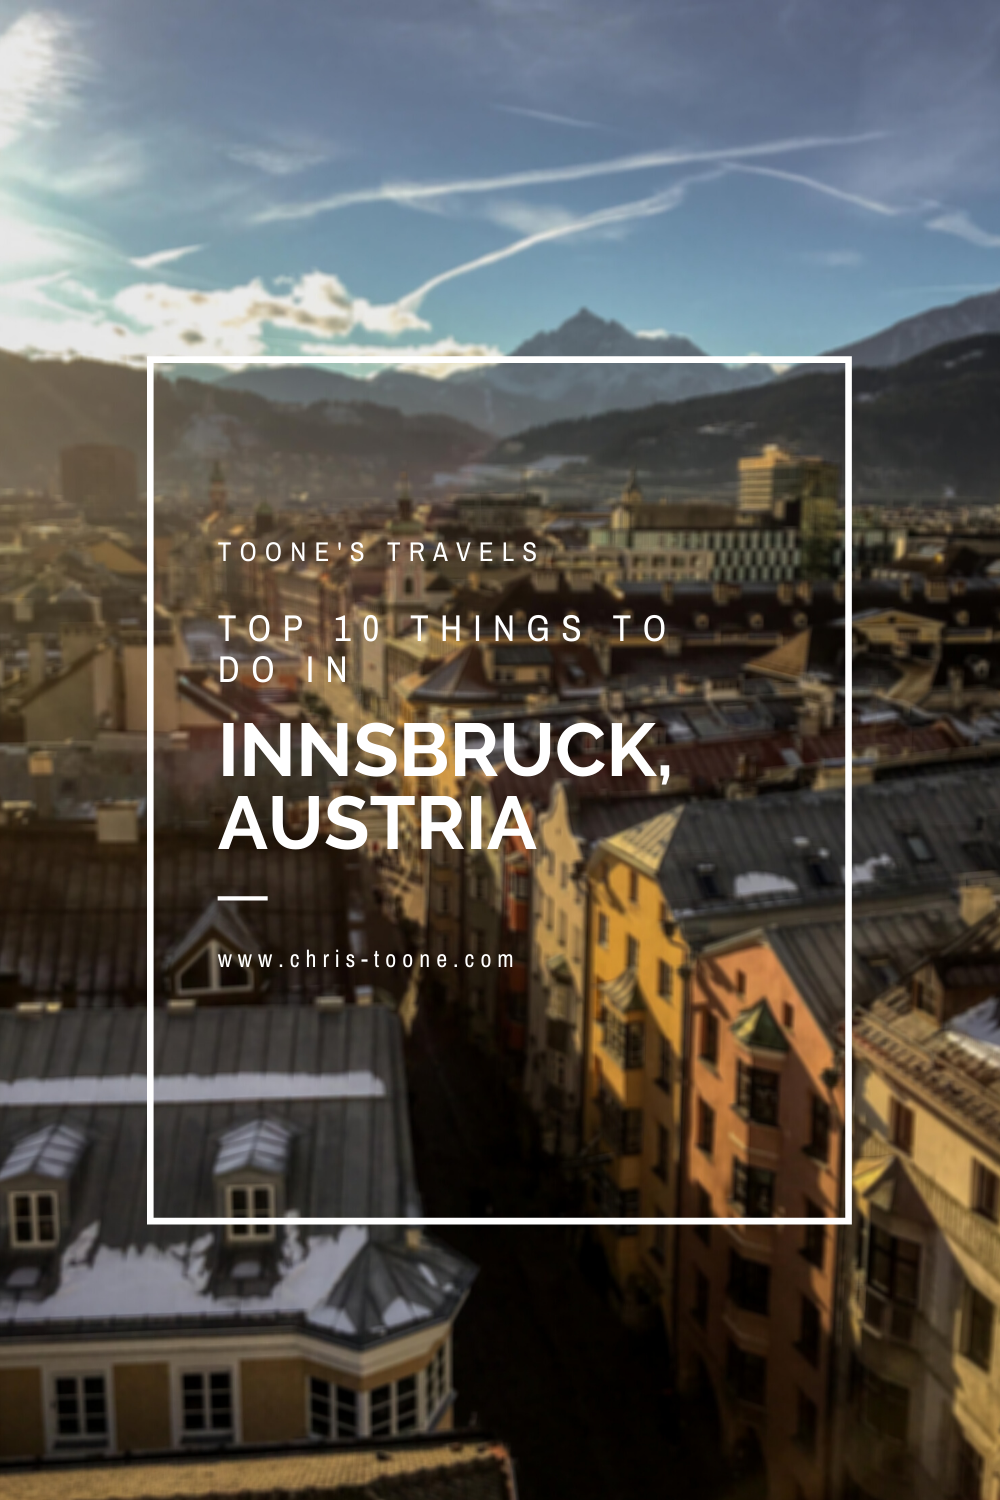 Top 10 things to do in Innsbruck, Austria | Toone's Travels